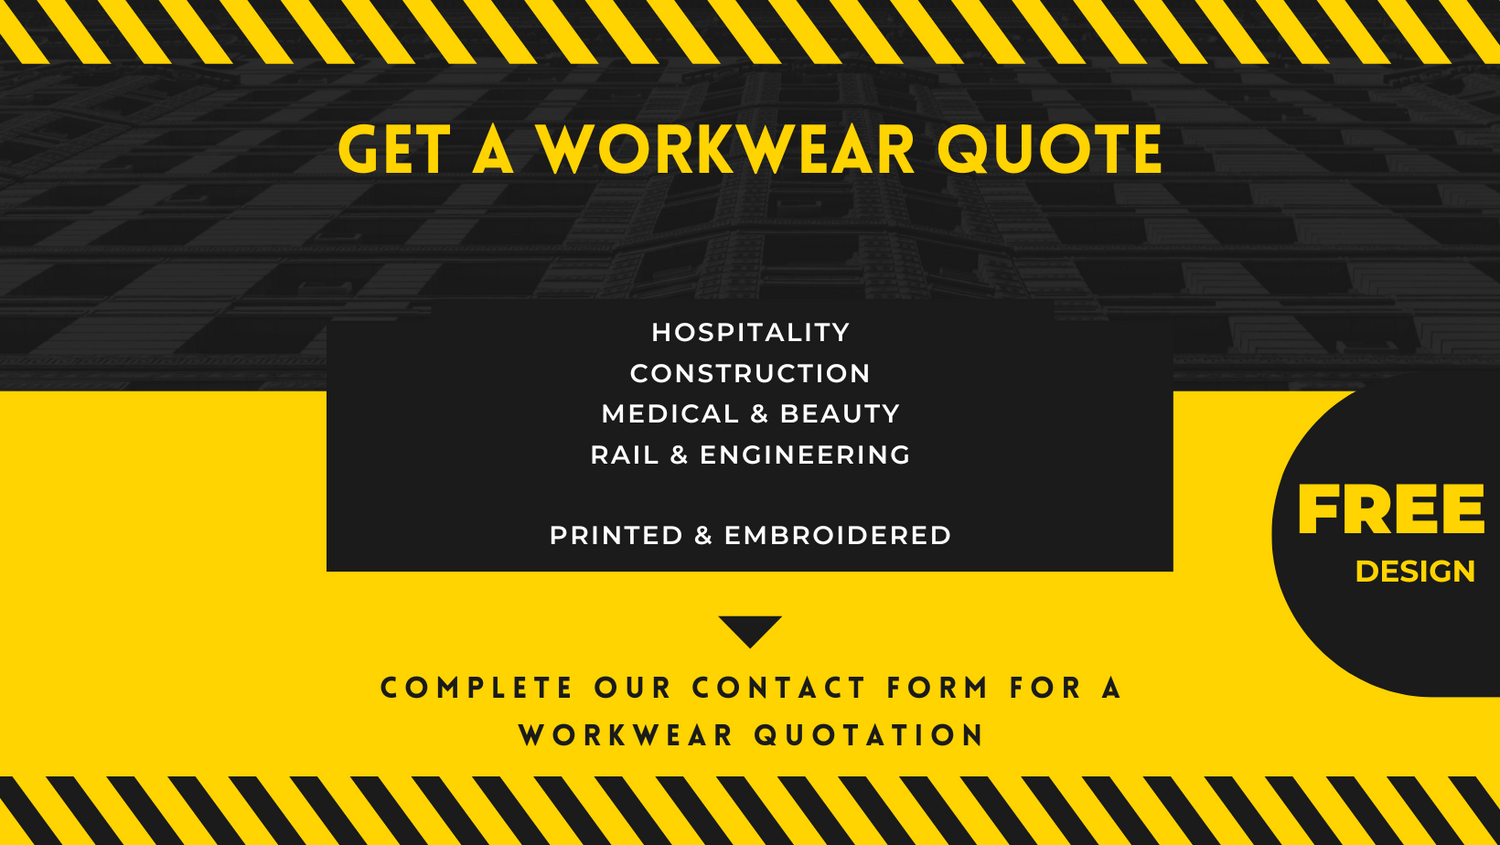 Get a workwear quote: Hospitality, construction, medical & beauty and rail & engineering